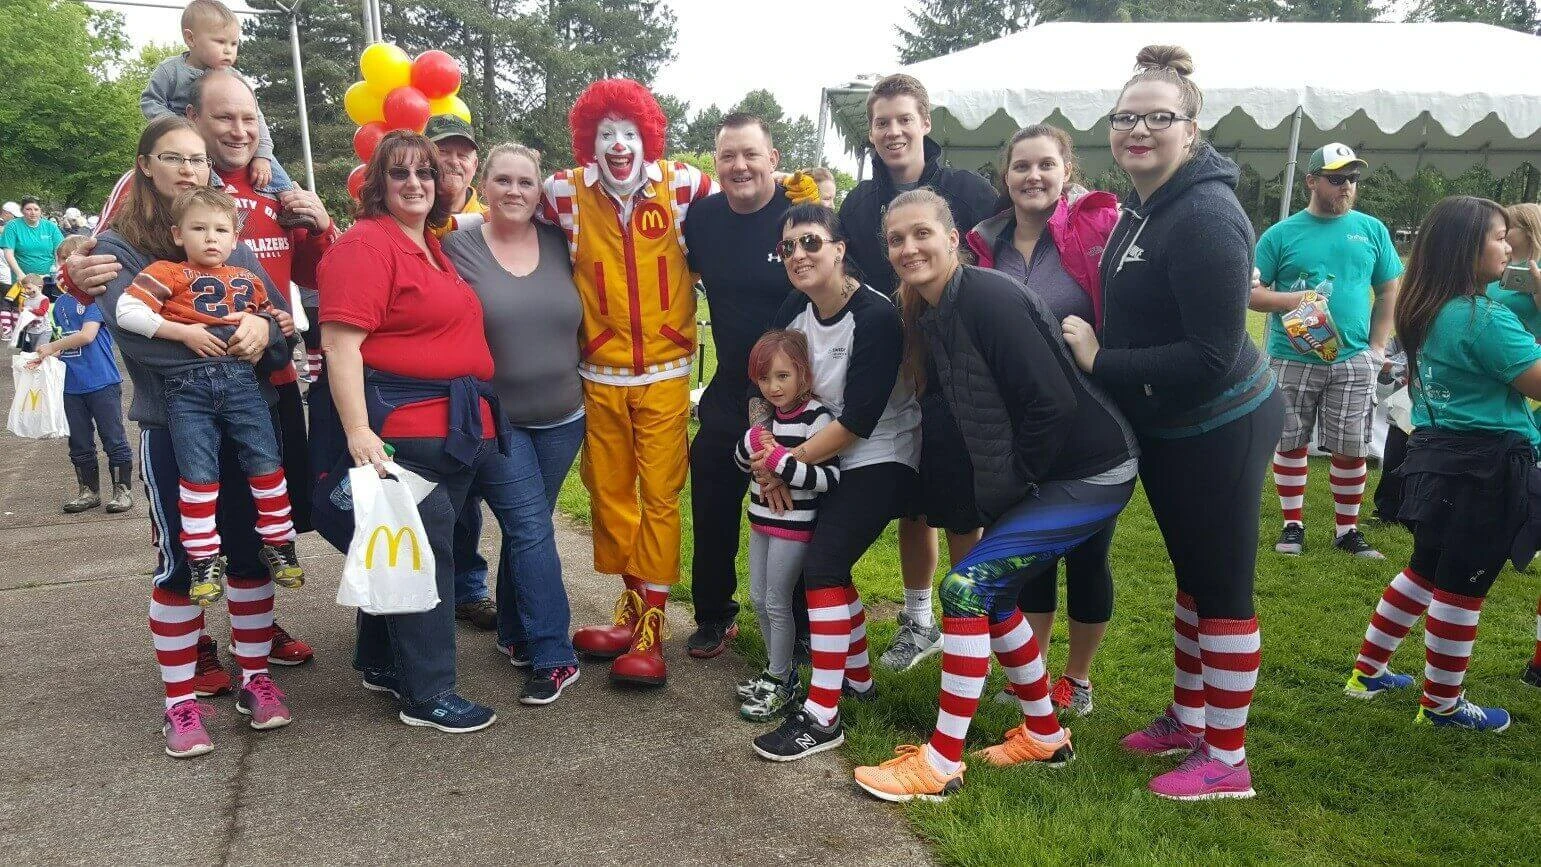 RMHC group photo with Ronald McDonald